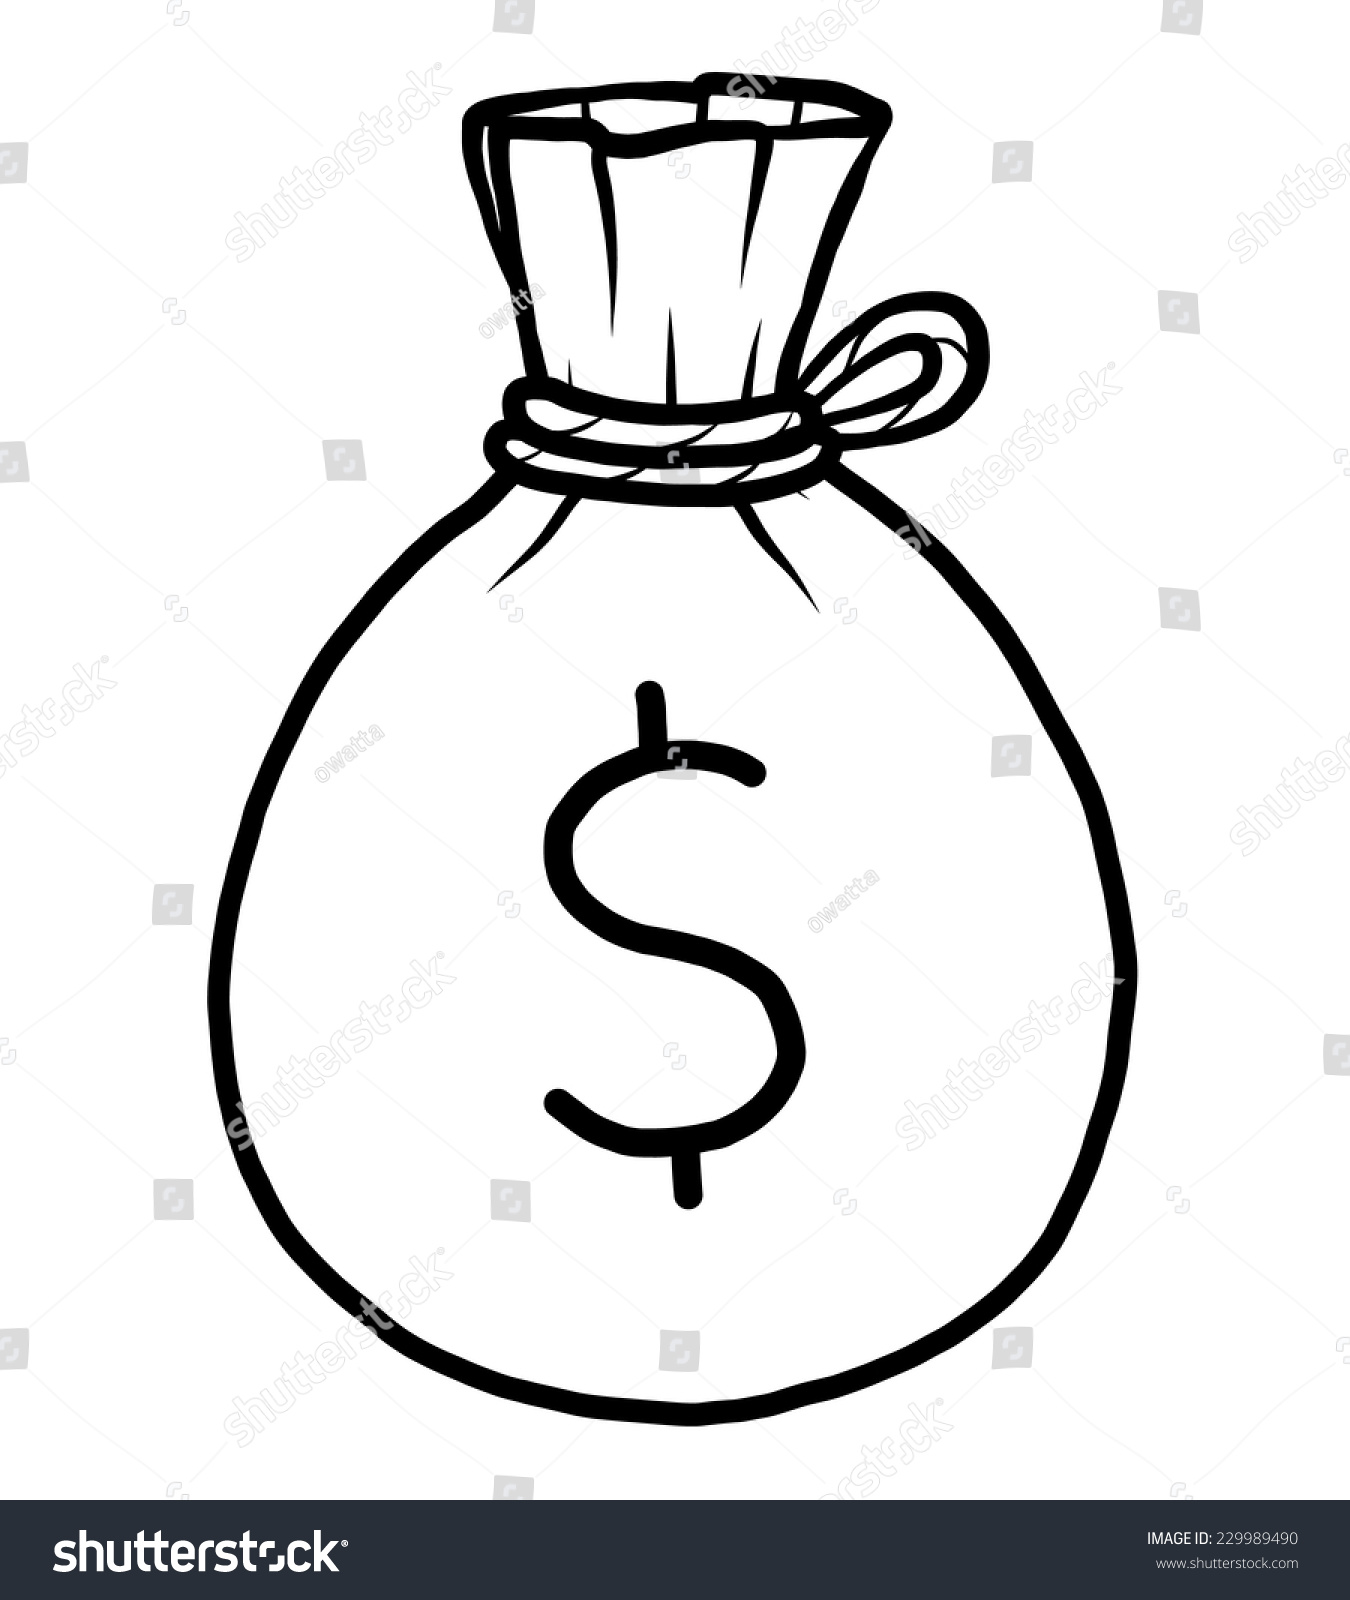 Money Sack Dollar Sign Cartoon Vector Stock Vector Royalty Free 229989490 Vector seamless background with hand drawn dollar signs. https www shutterstock com image vector money sack dollar sign cartoon vector 229989490